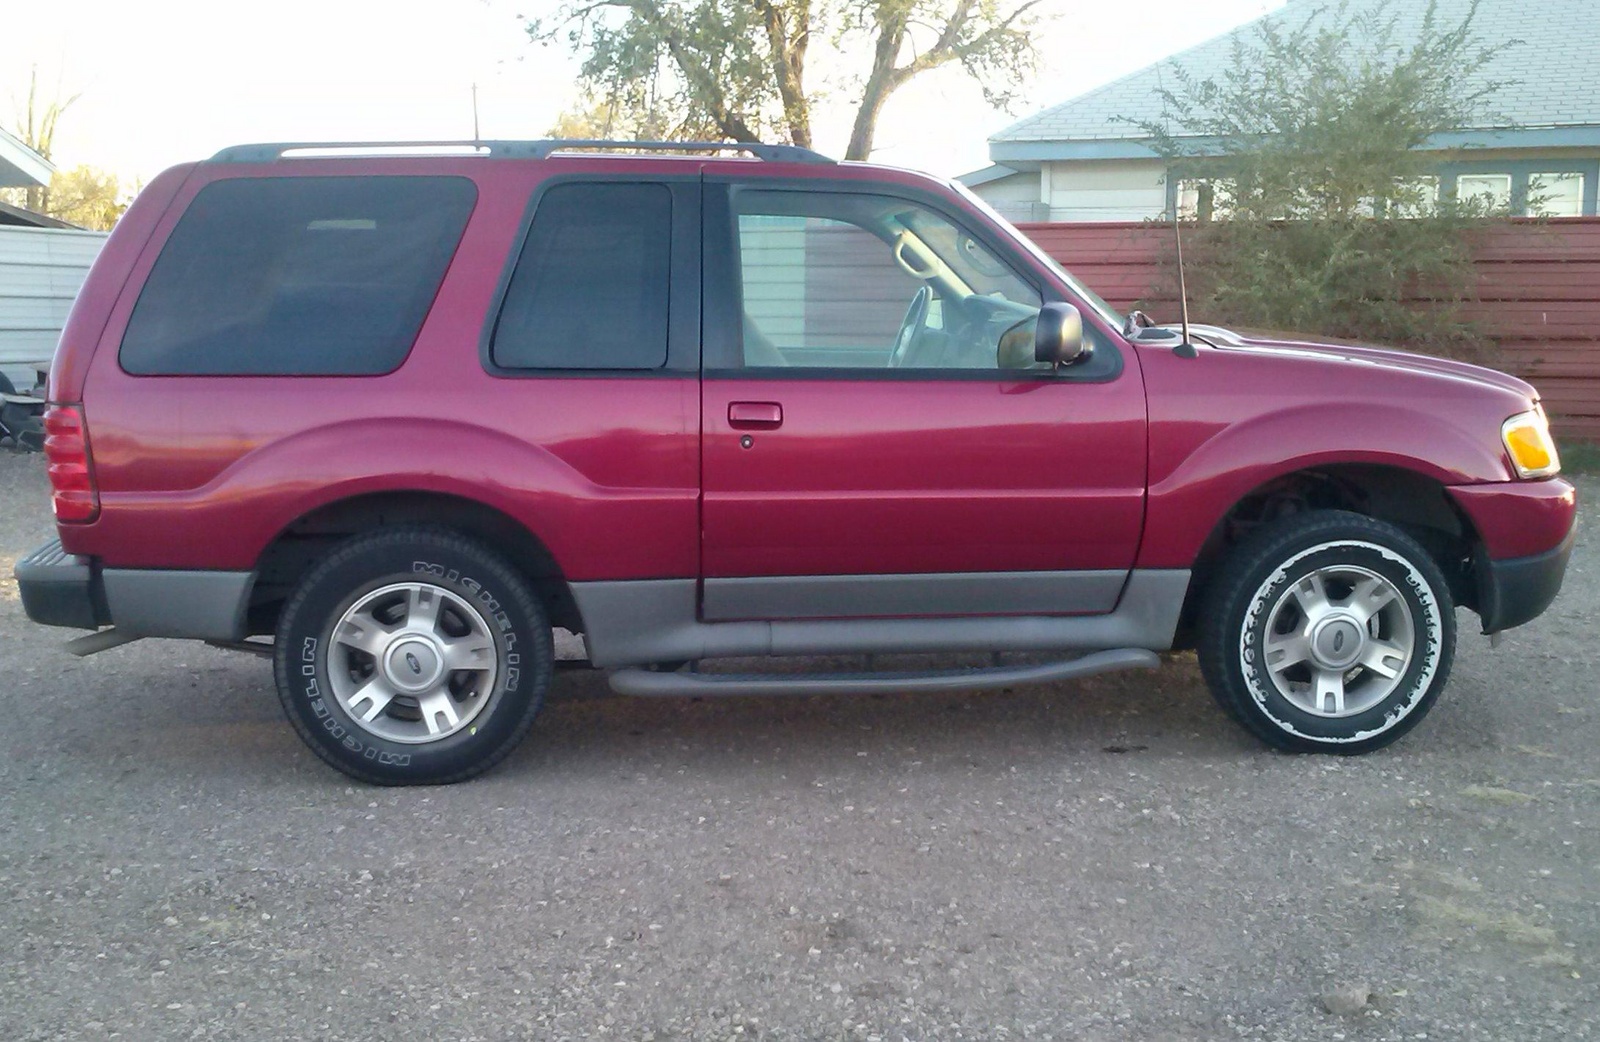 2003 Ford explorer xlt suv review #4